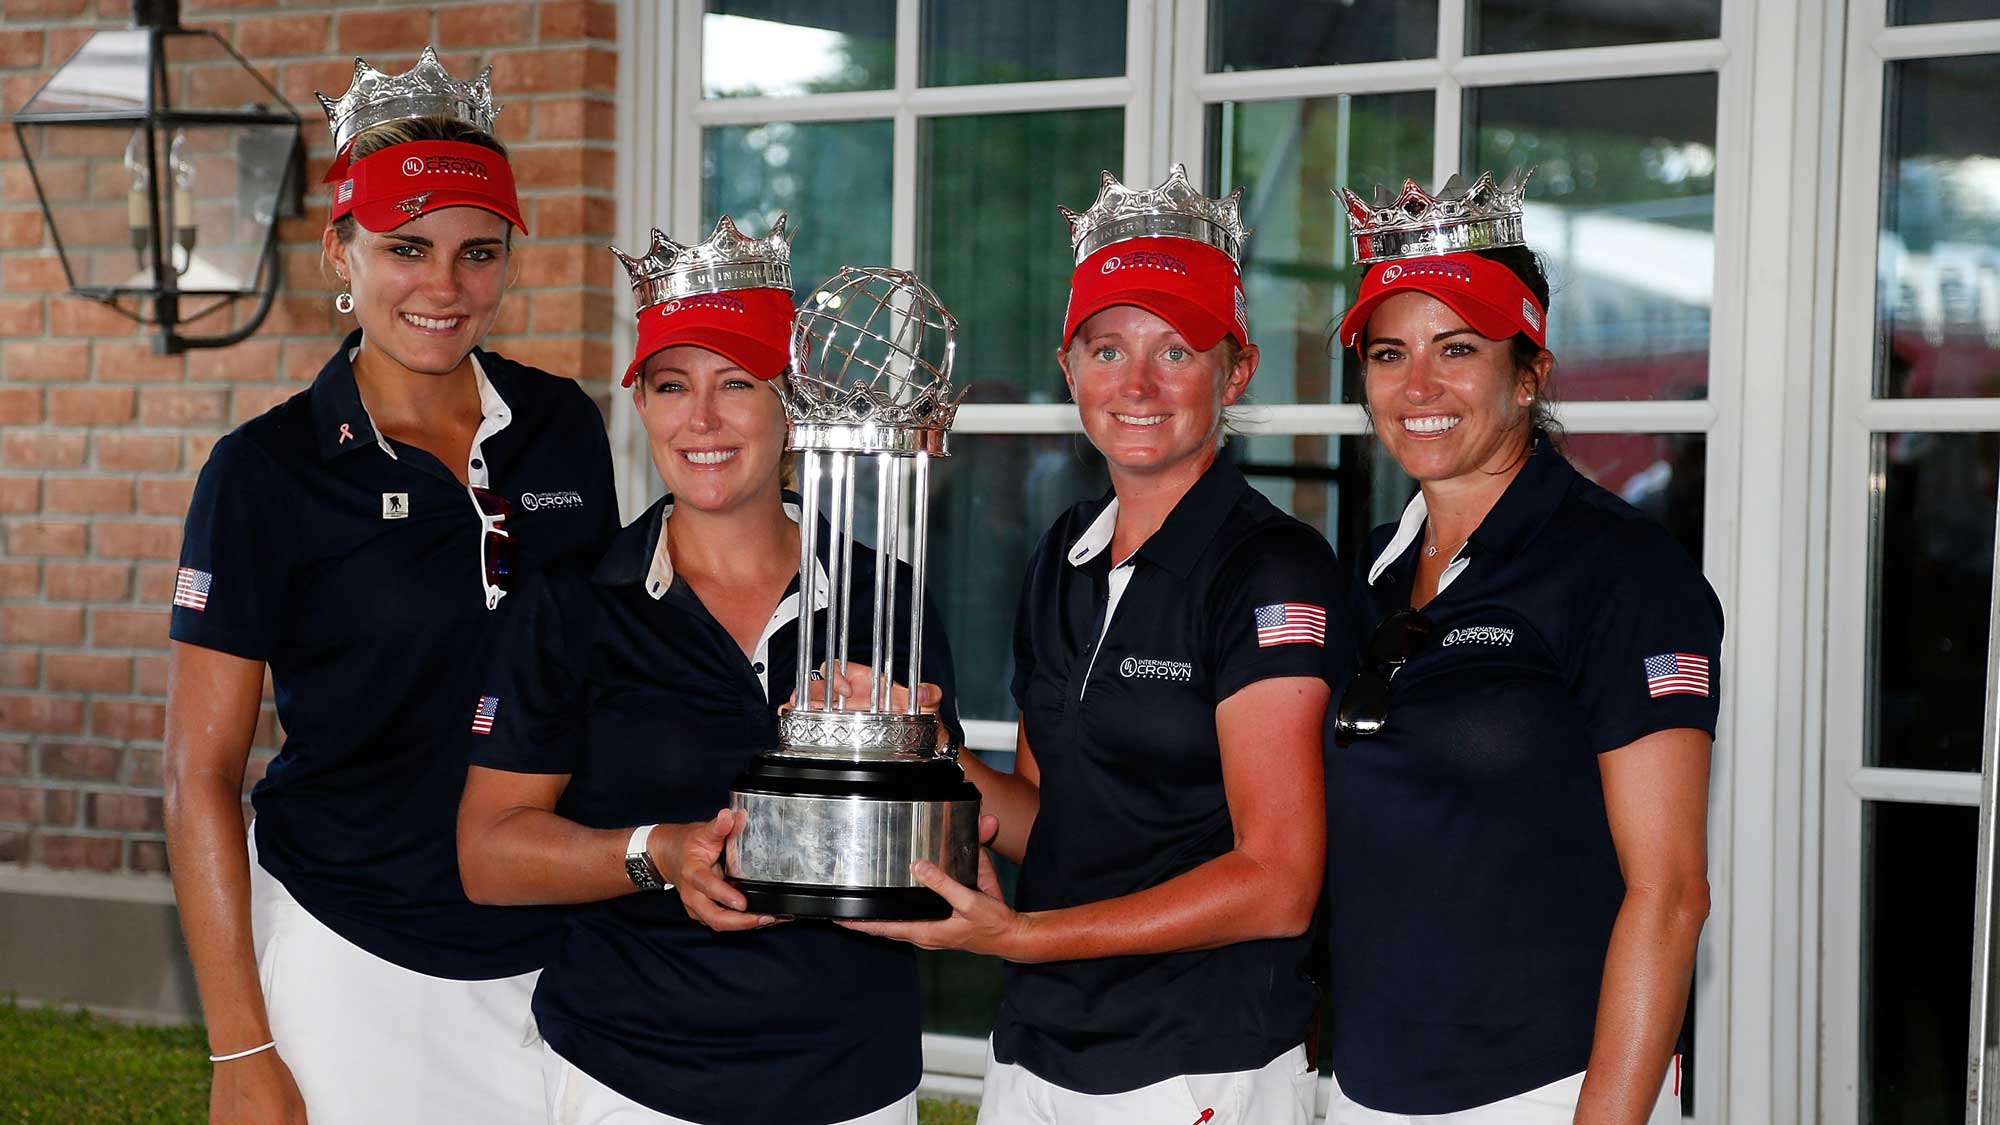 (L-R) Lexi Thompson, Cristie Kerr, Stacy Lewis and Gerina Piller of the United States pose with the champions trophy after winning the 2016 UL International Crown